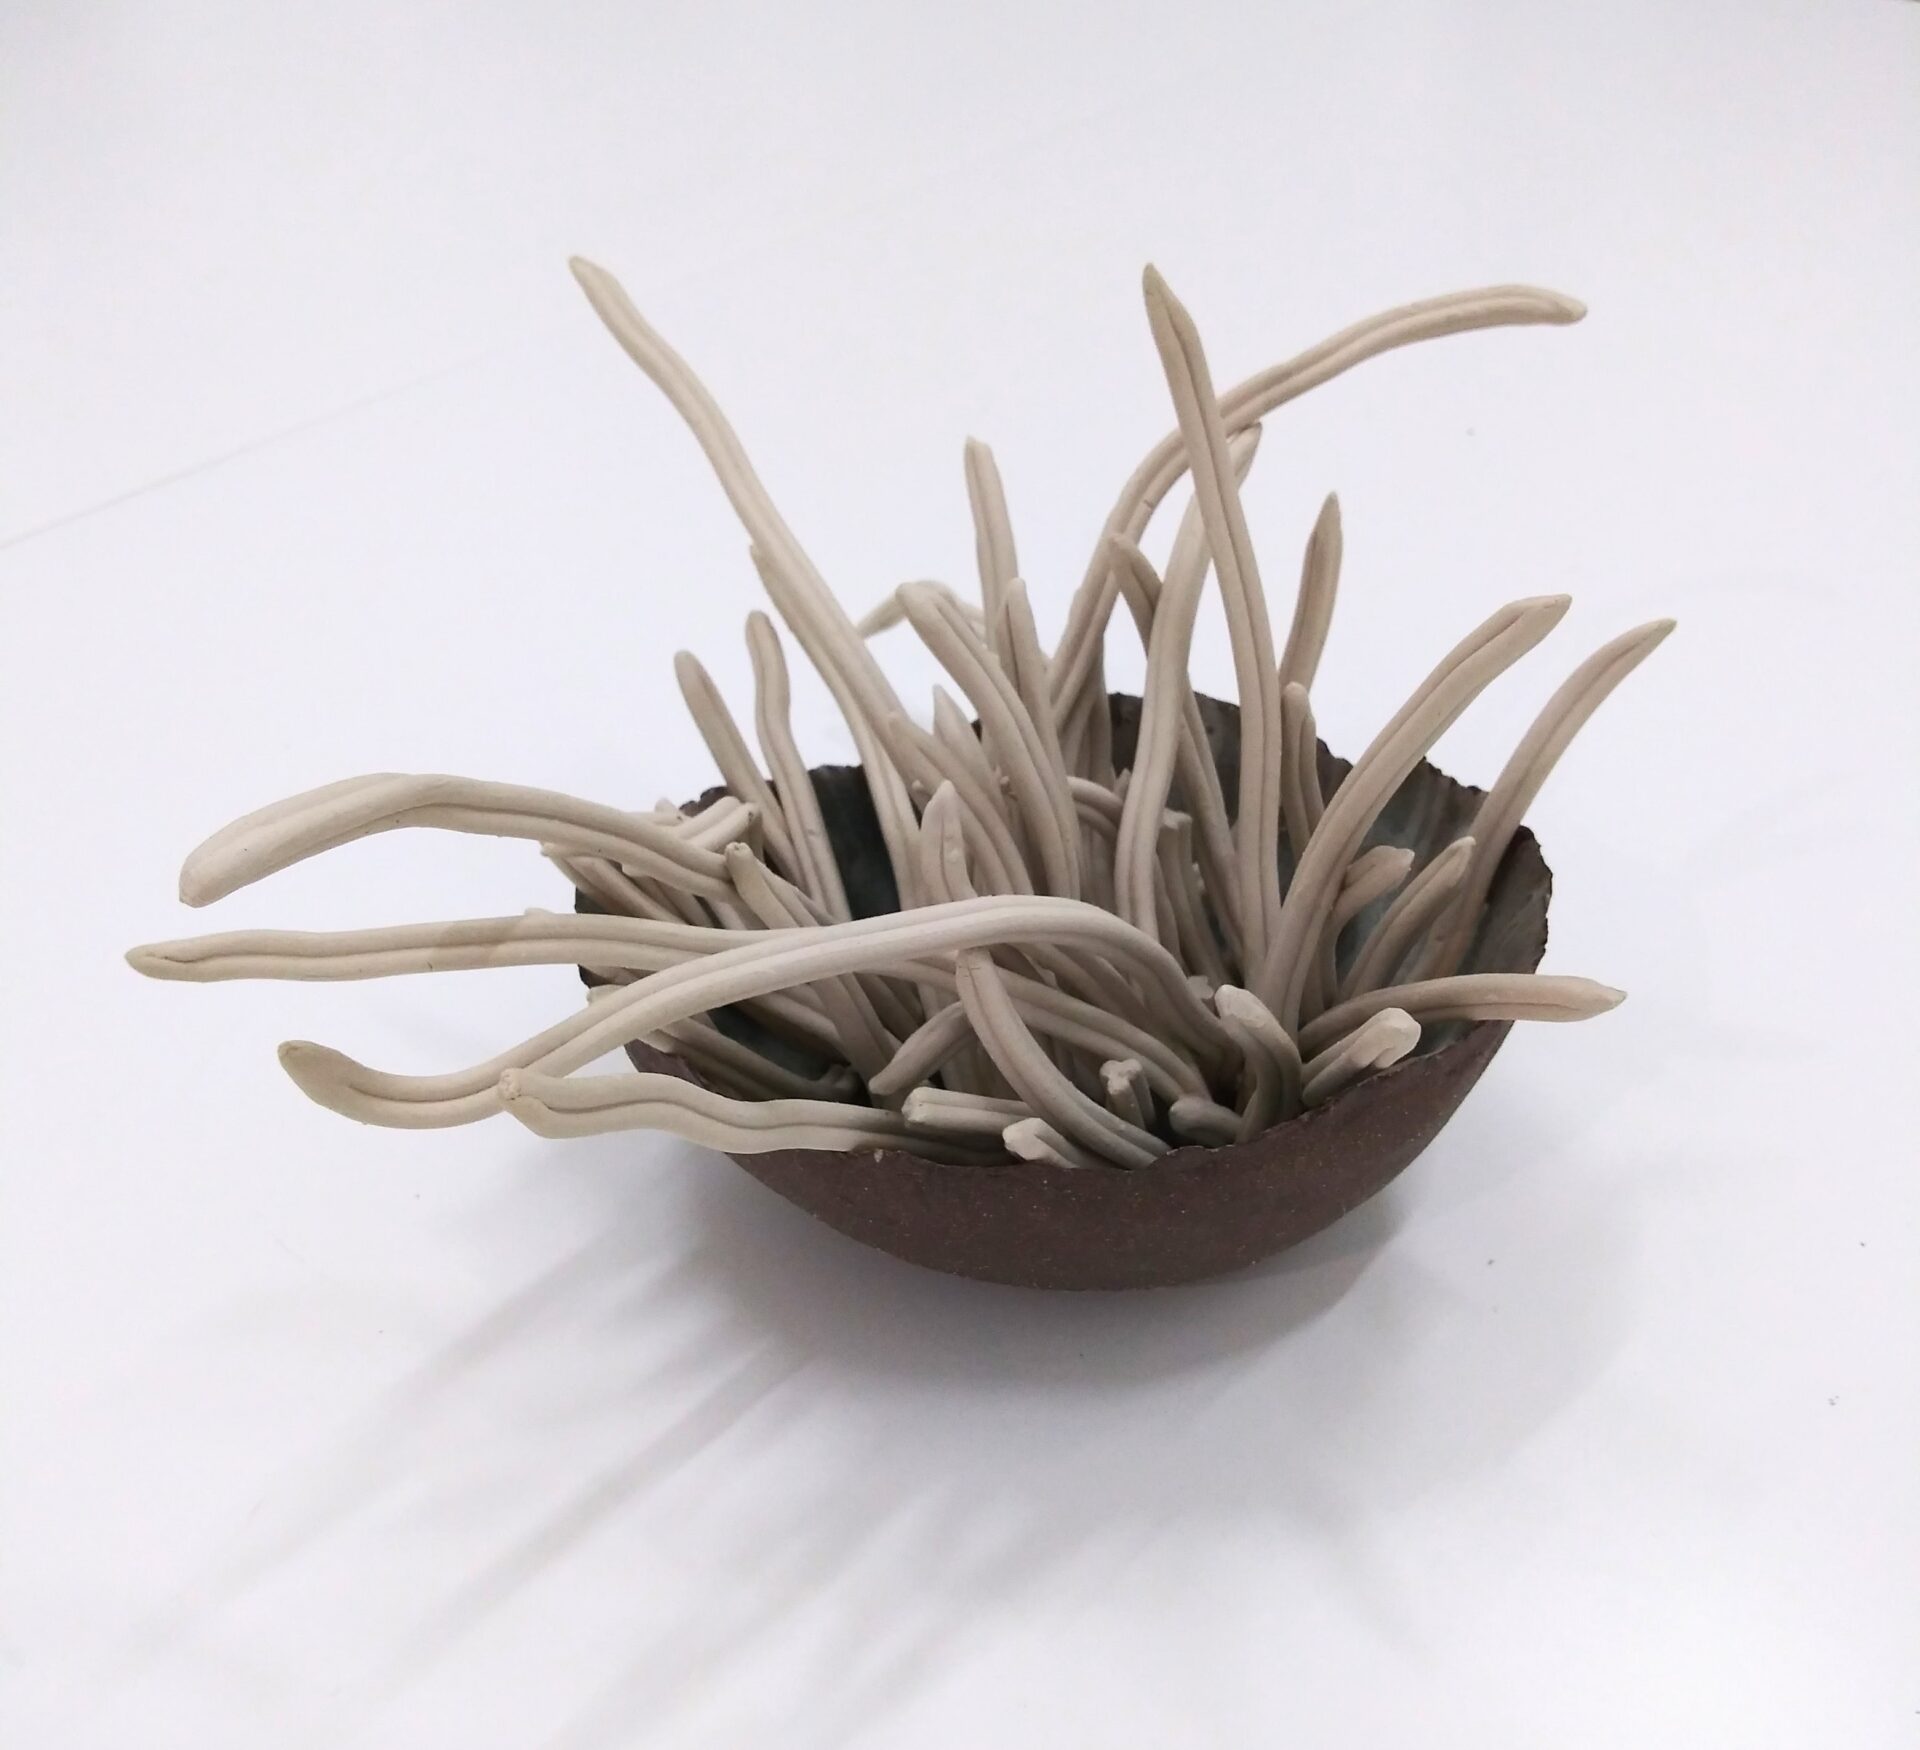 Ceramic art sculpture of organic shapes in the form of a plant growing from a round bowl